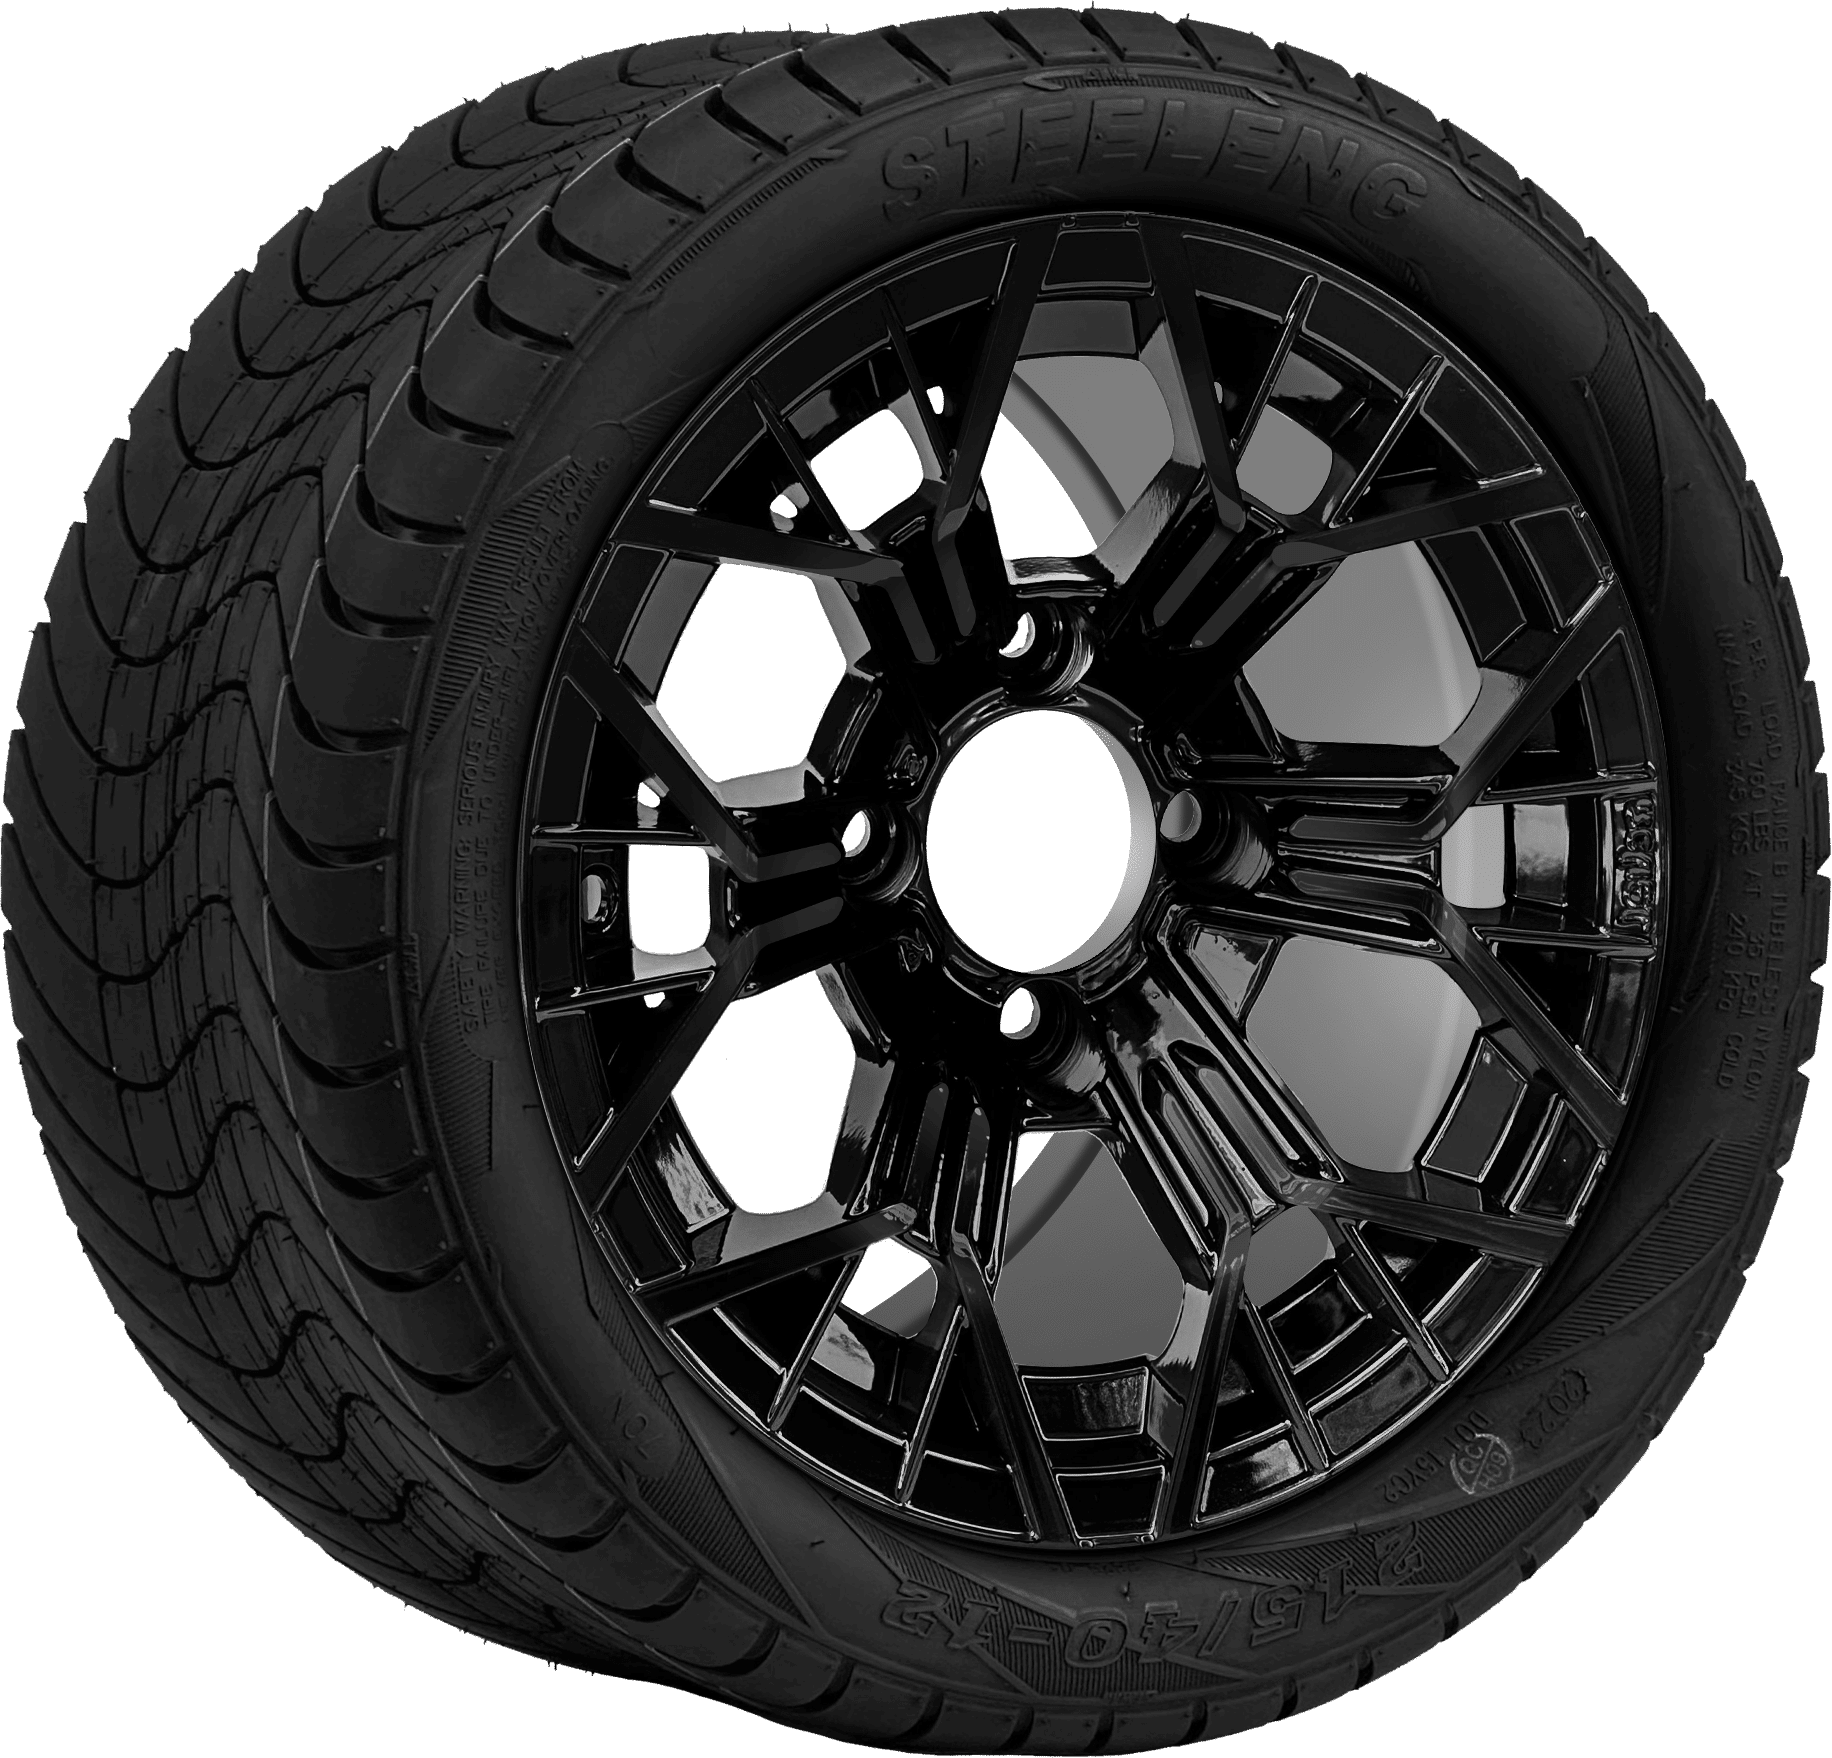 BNDL-TR1211-WH1268-CC0027-LN0005 12″ MANTIS GLOSSY BLACK WHEEL – ALUMINUM ALLOY / STEELENG 215/40-12 LOW PROFILE TIRE DOT APPROVED